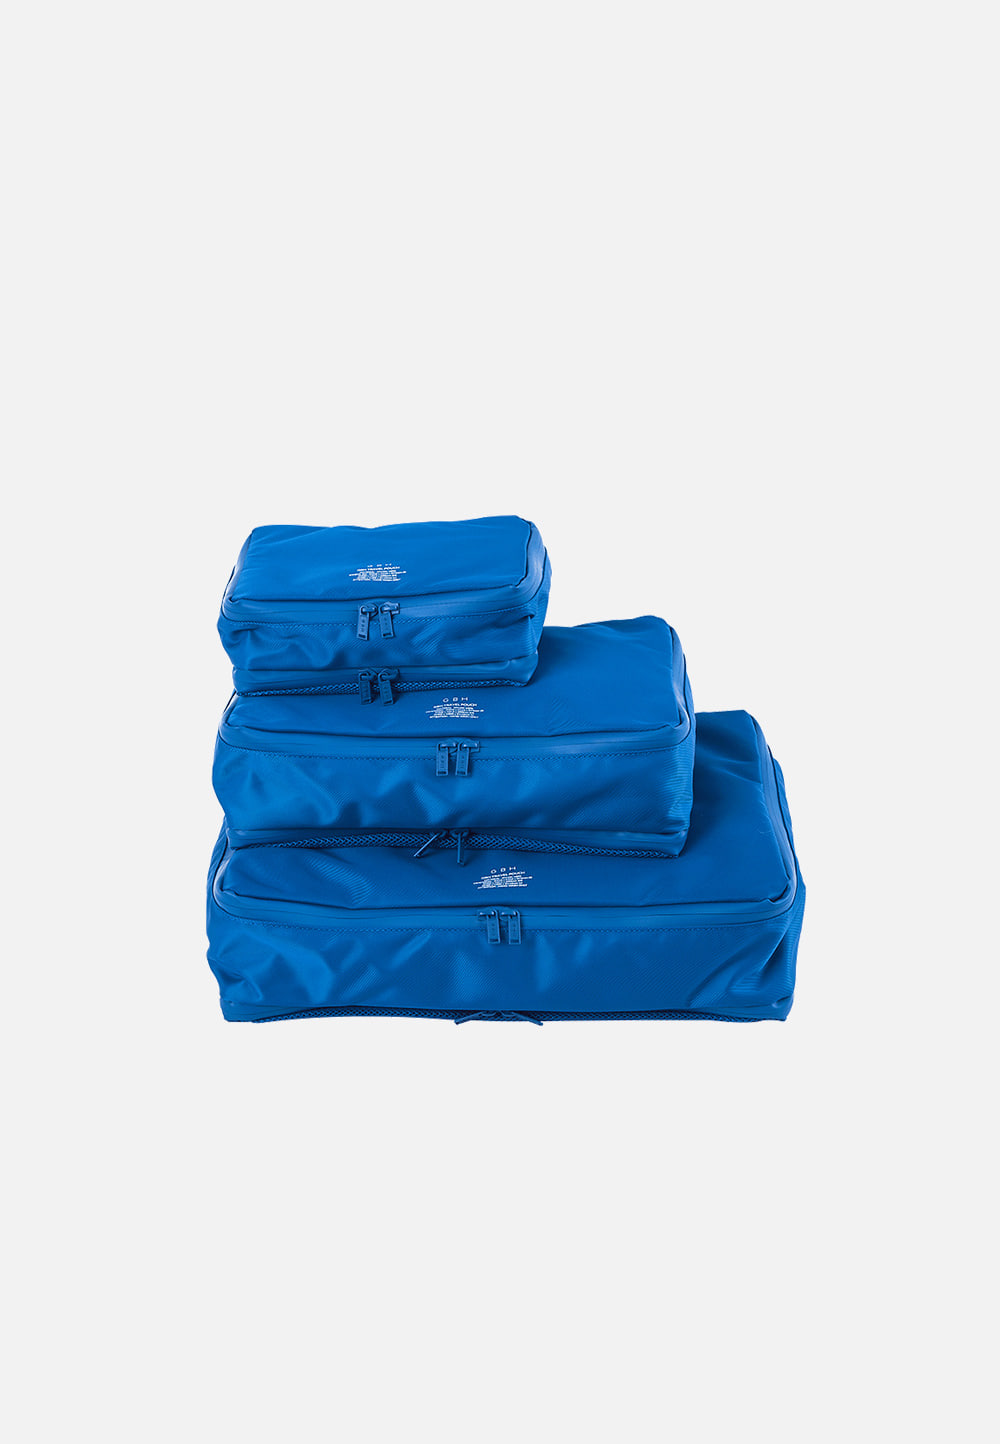 TRAVEL POUCH BLUE